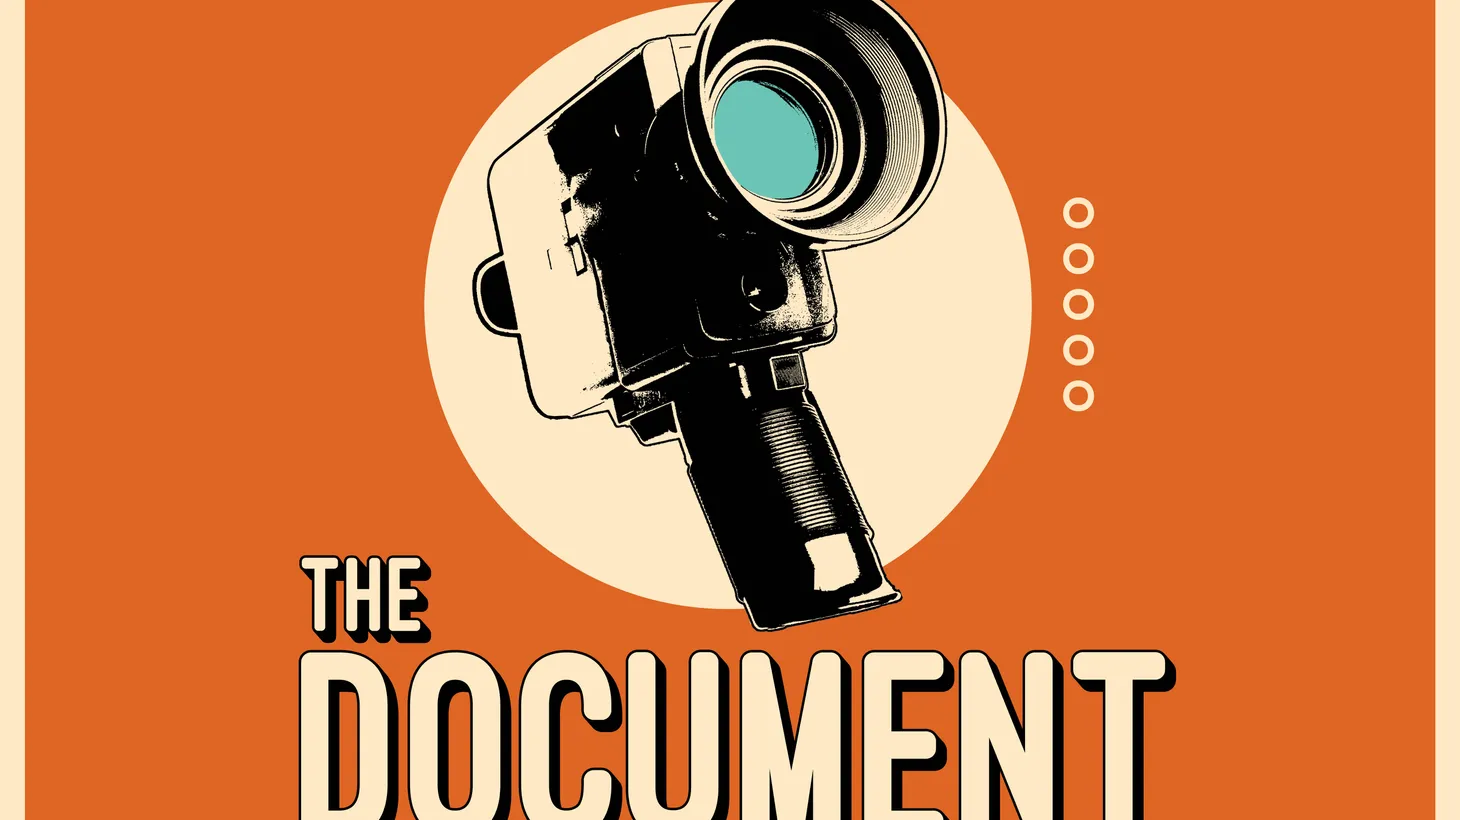 The Document is a new kind of mash-up between documentaries and radio. From creator Matt Holzman, it goes beyond clips and interviews, mining great stories from the raw footage of documentaries present, past and in-progress.